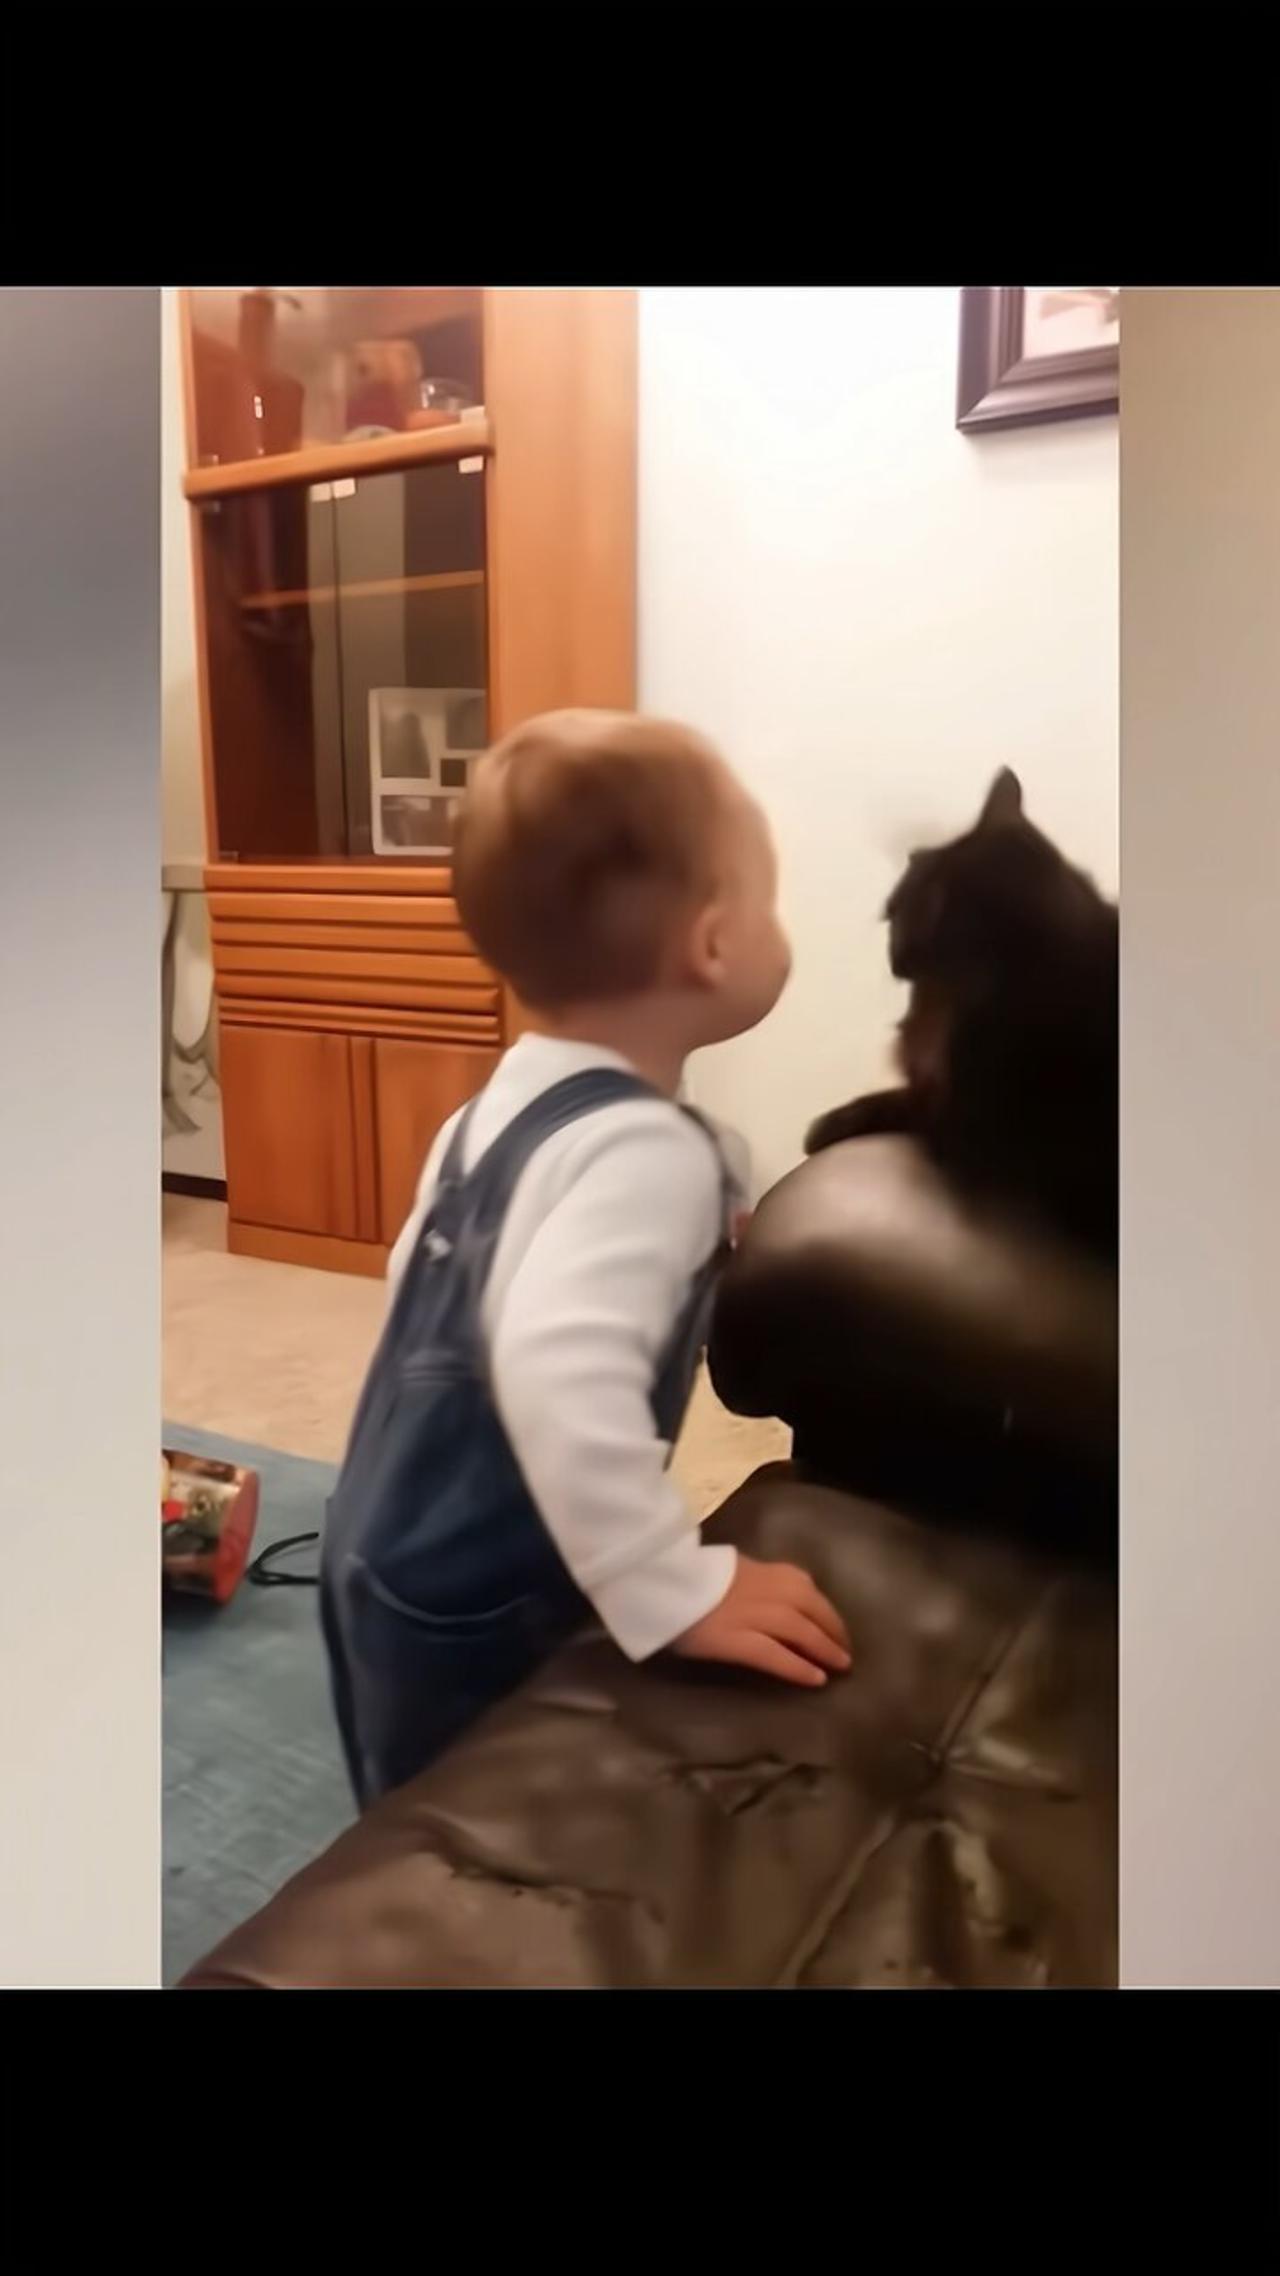 Cats and babies 🥹🤣